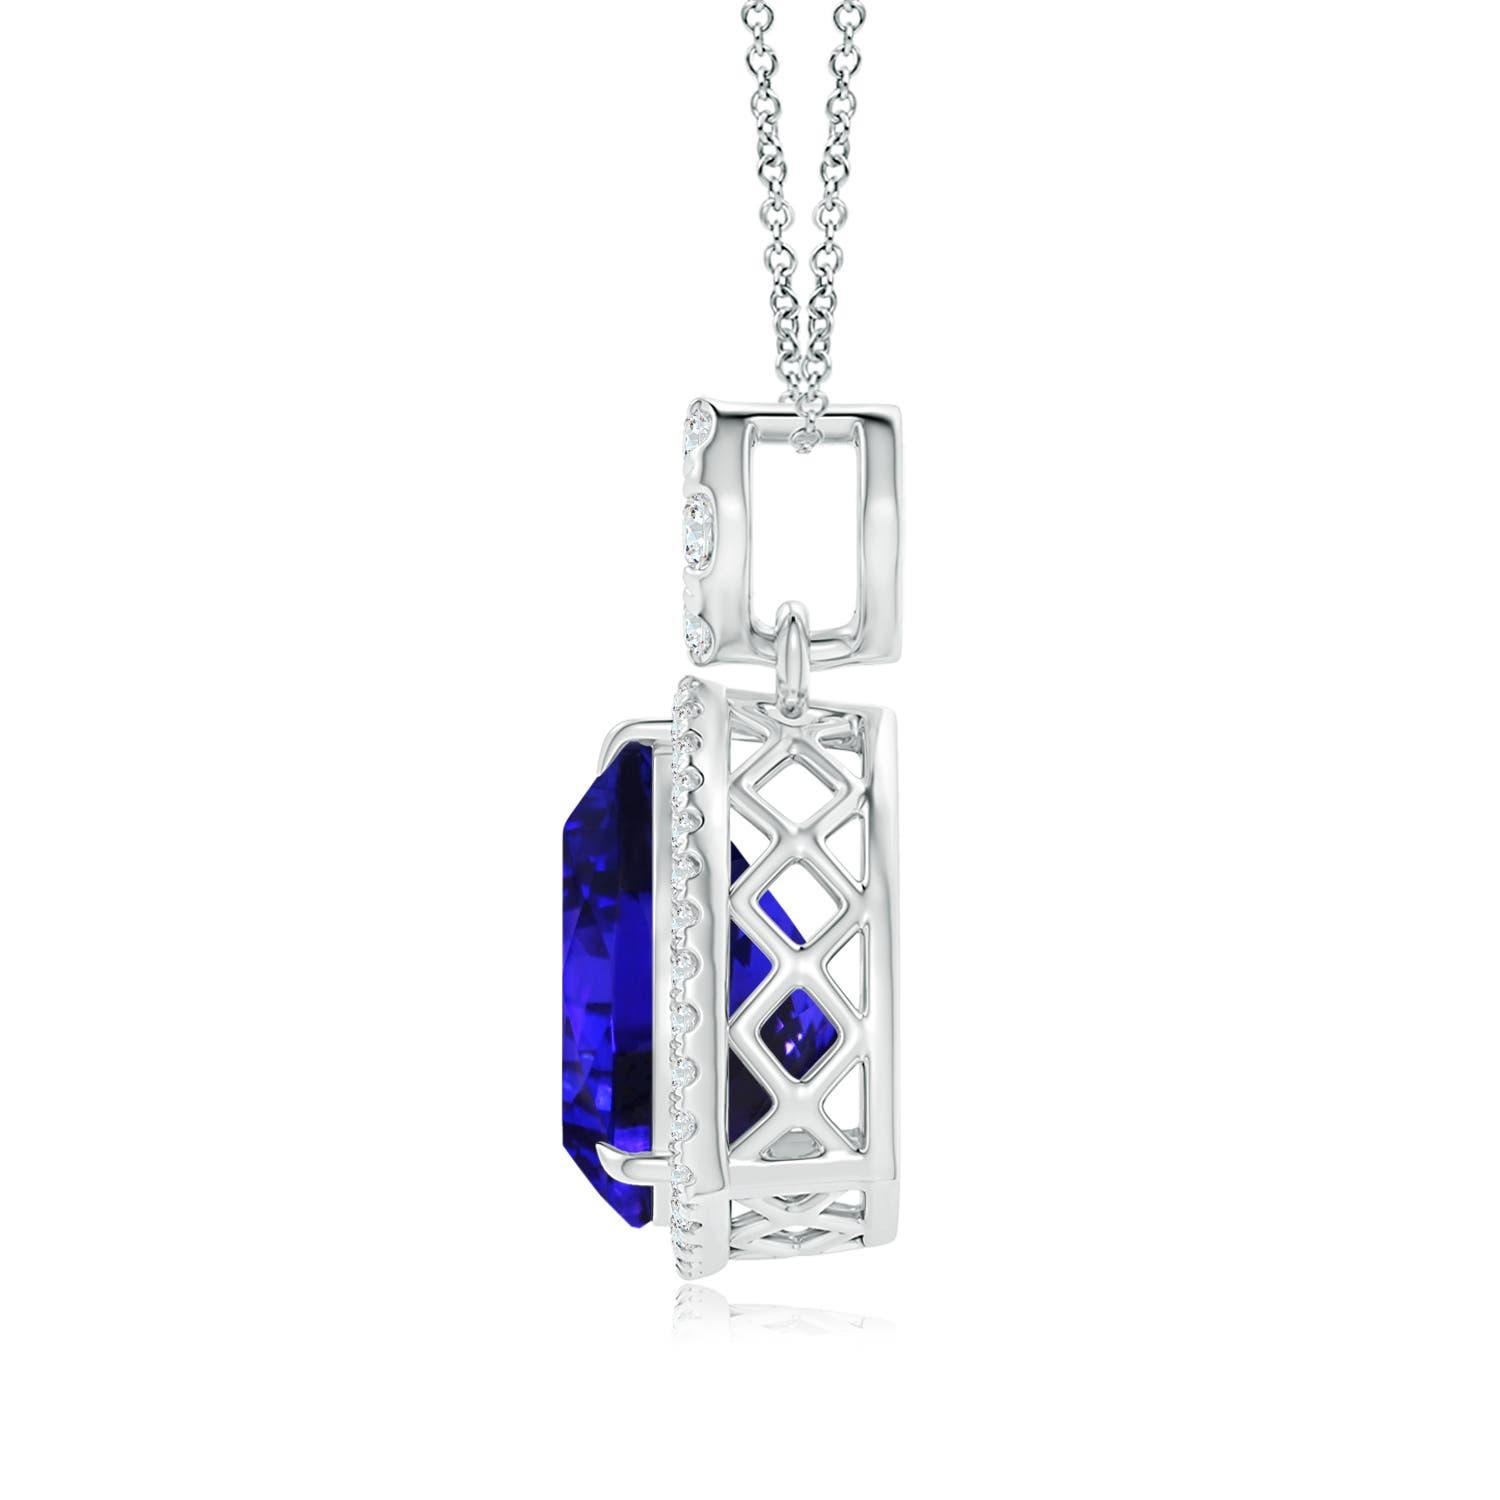 Connected to a diamond-studded bale is a GIA certified trillion tanzanite halo pendant in 14k white gold. While the halo diamonds are secured in U pave settings, the bale features prong-set diamonds in a cluster. The chequered filigree on the metal